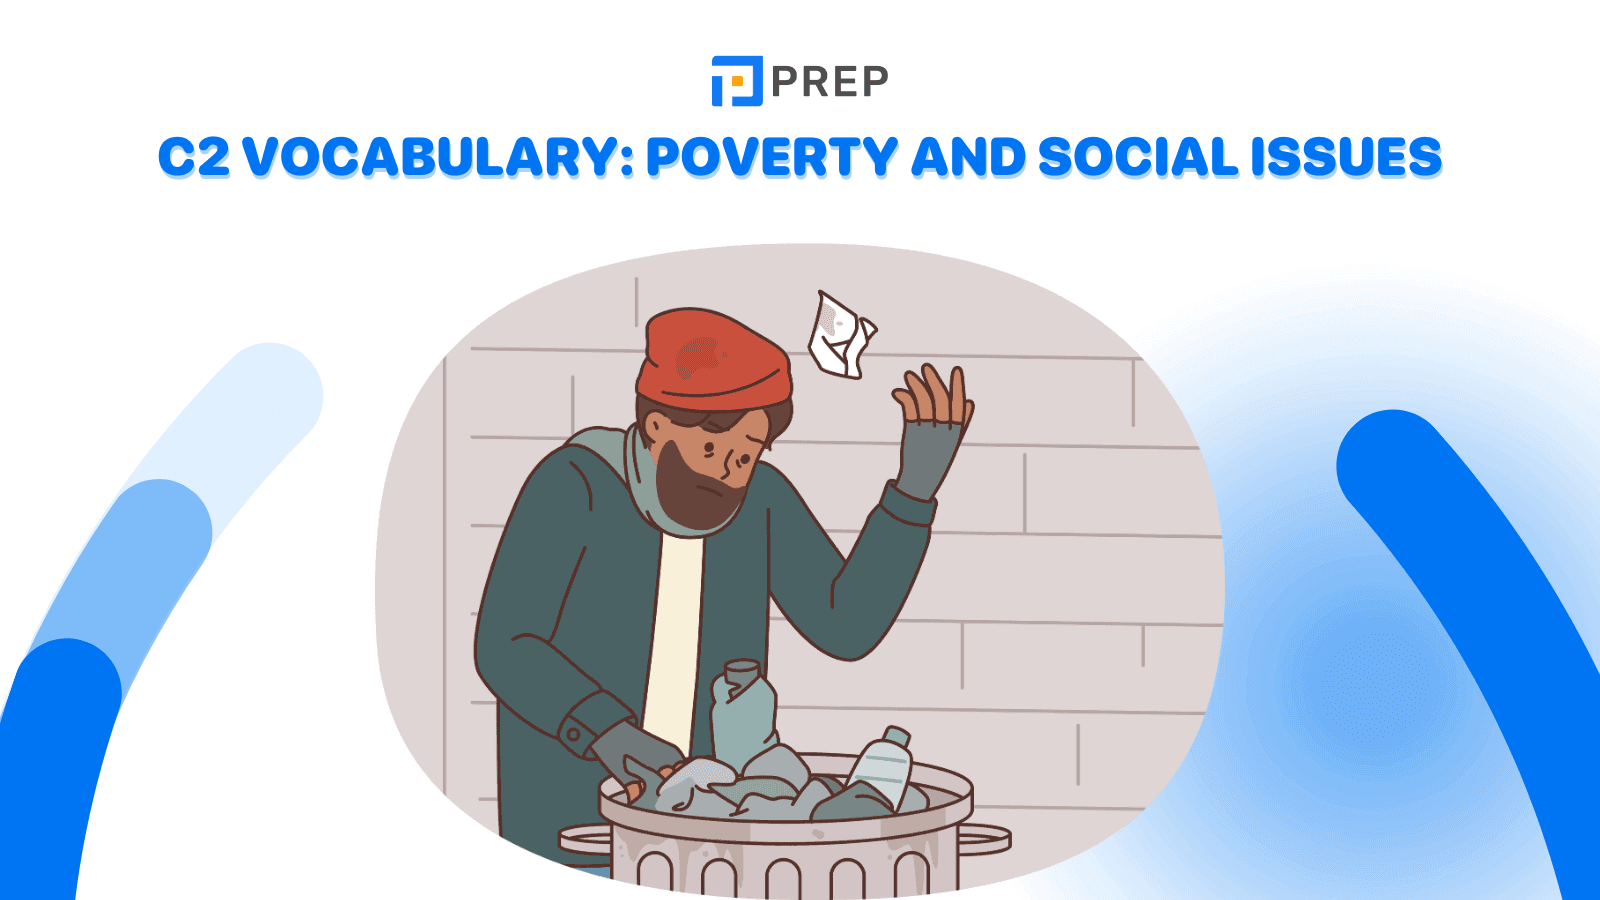 C2 vocabulary: Poverty and Social issues